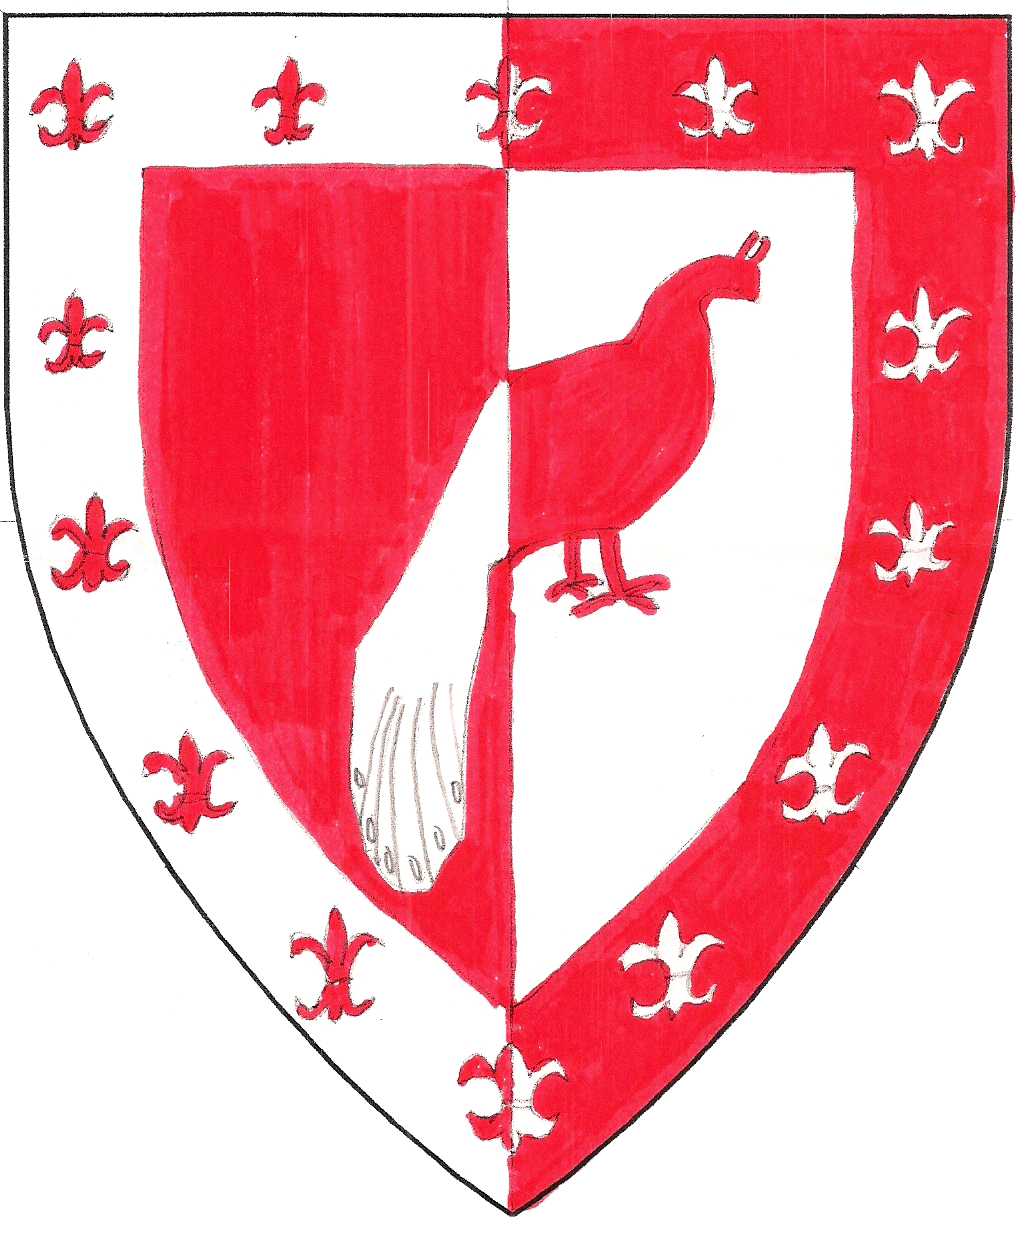 The arms of Letitia Fannyng